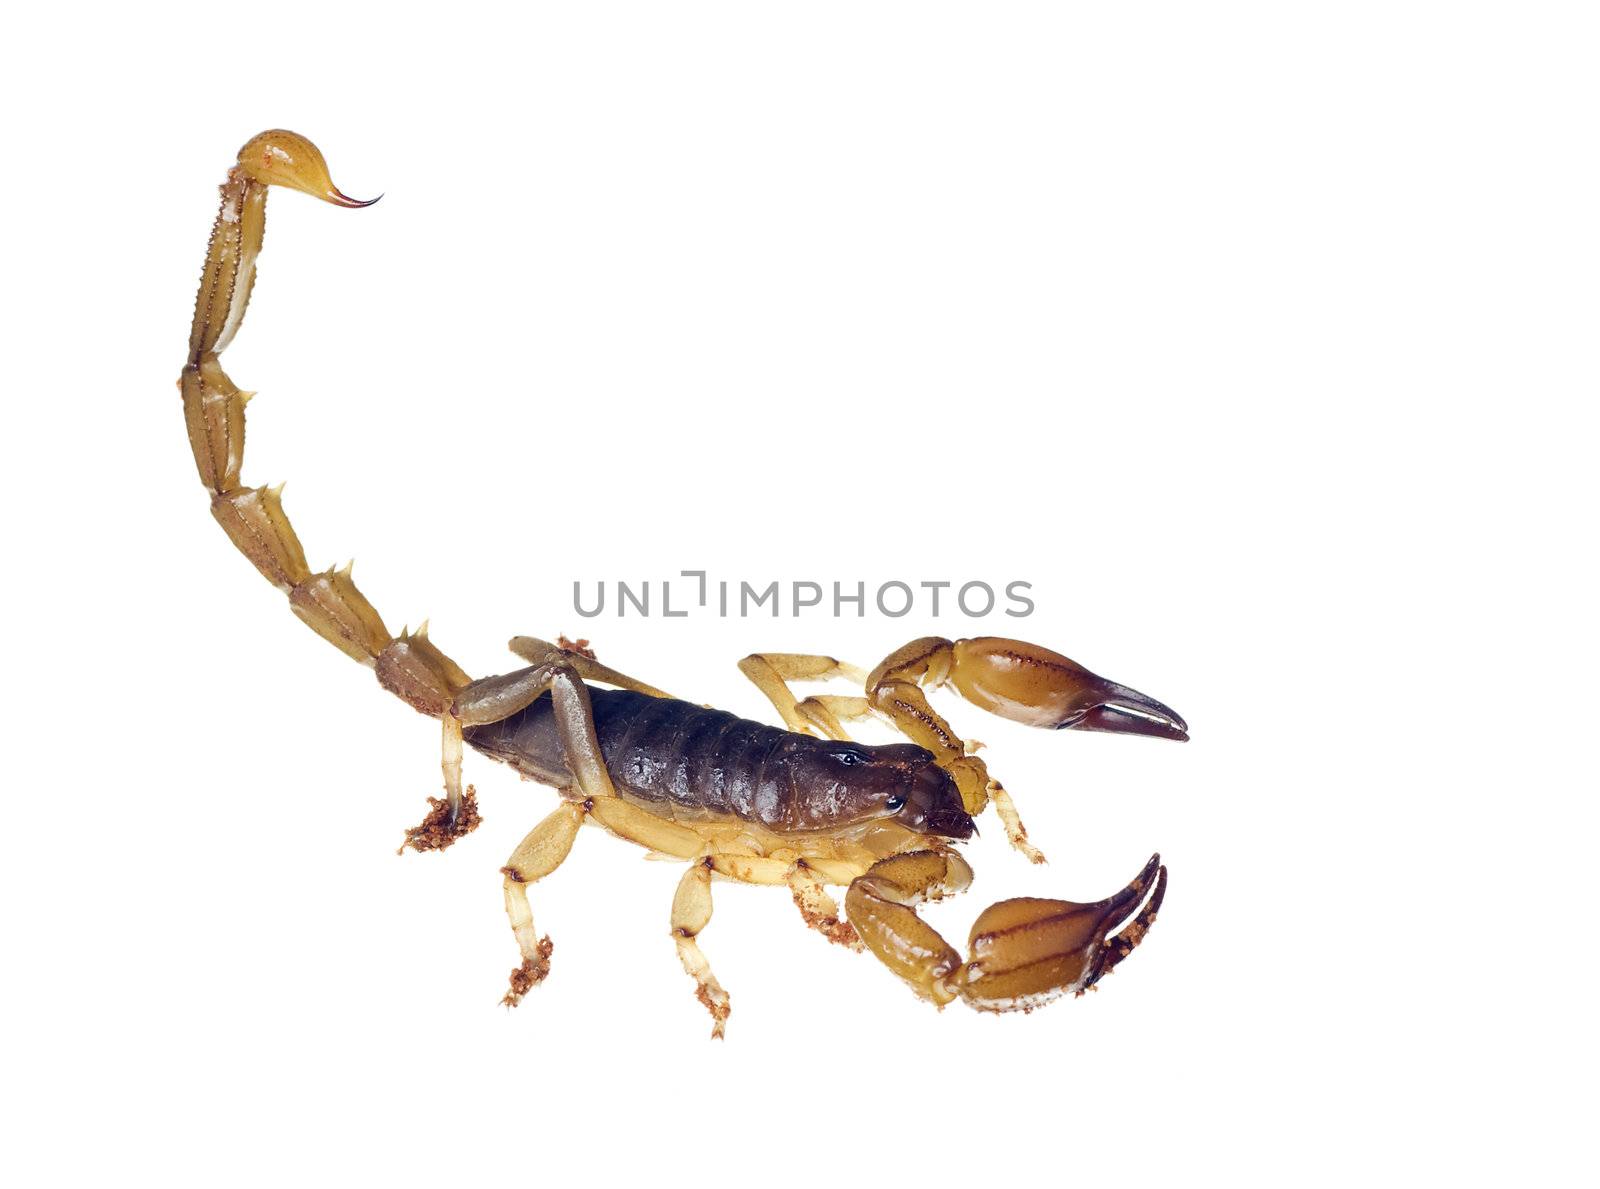 Scorpion with tail curved up ready to sting by Jaykayl